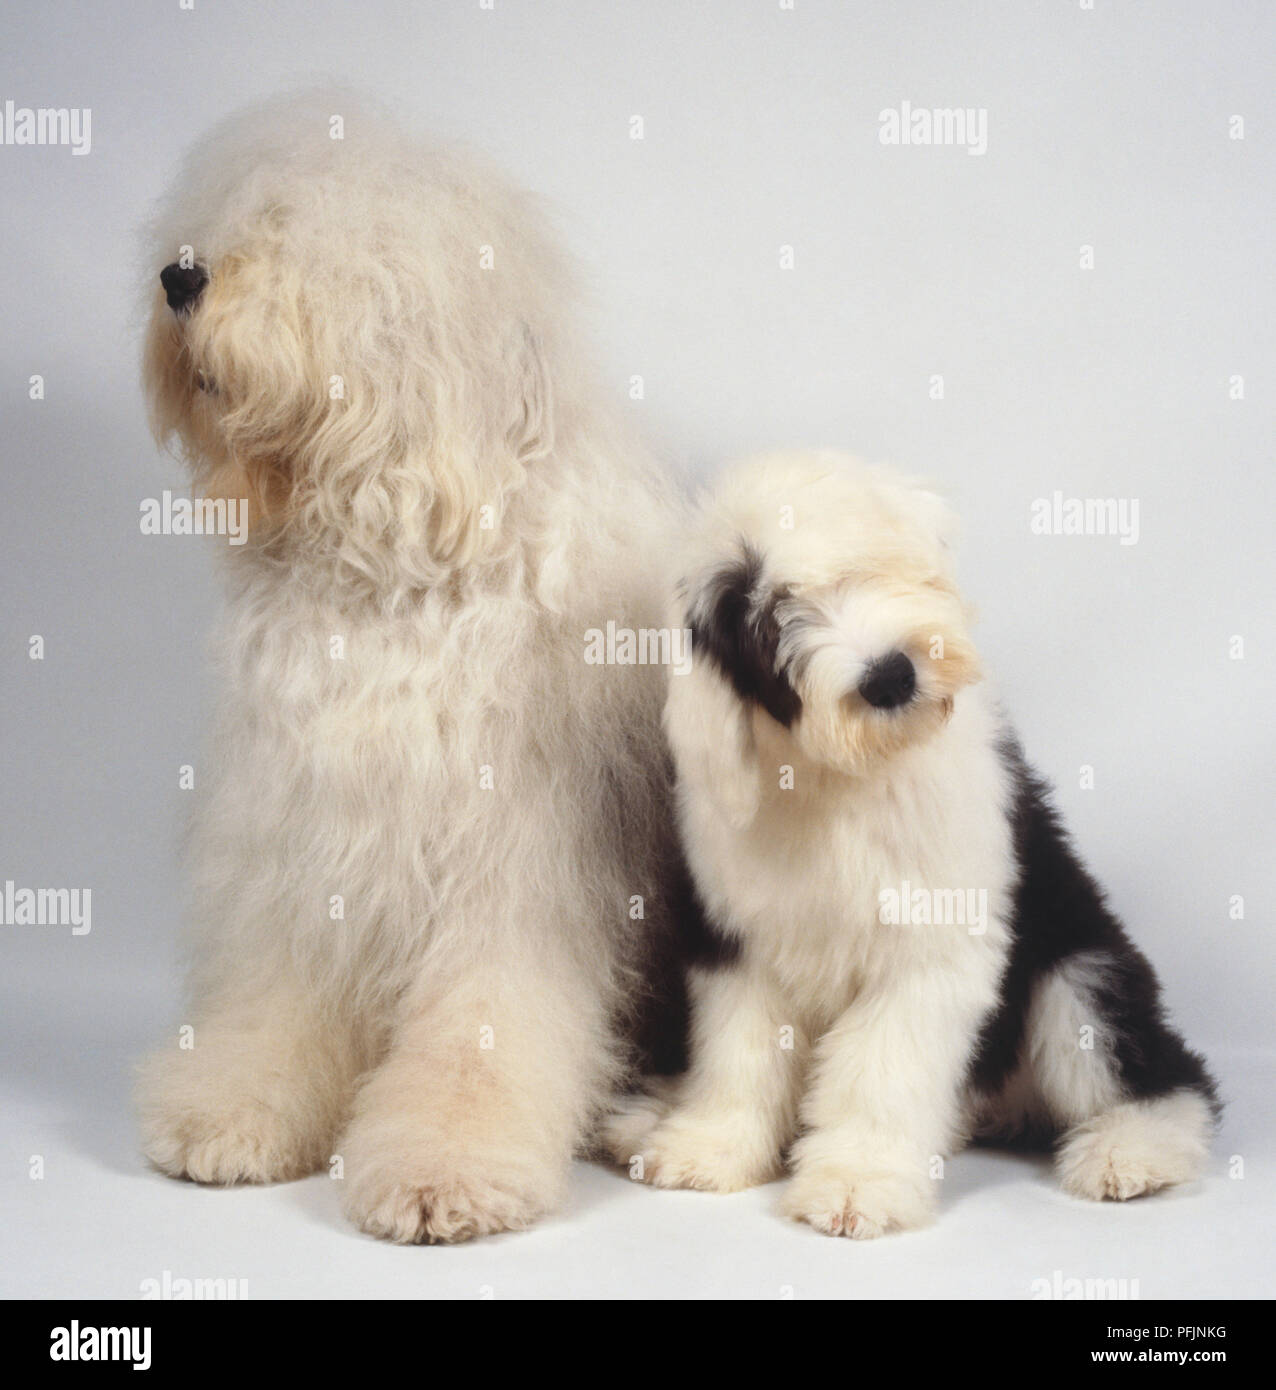 Two Old English Sheepdogs Canis Familiaris White Dog And Black And White Puppy Side View Stock Photo Alamy